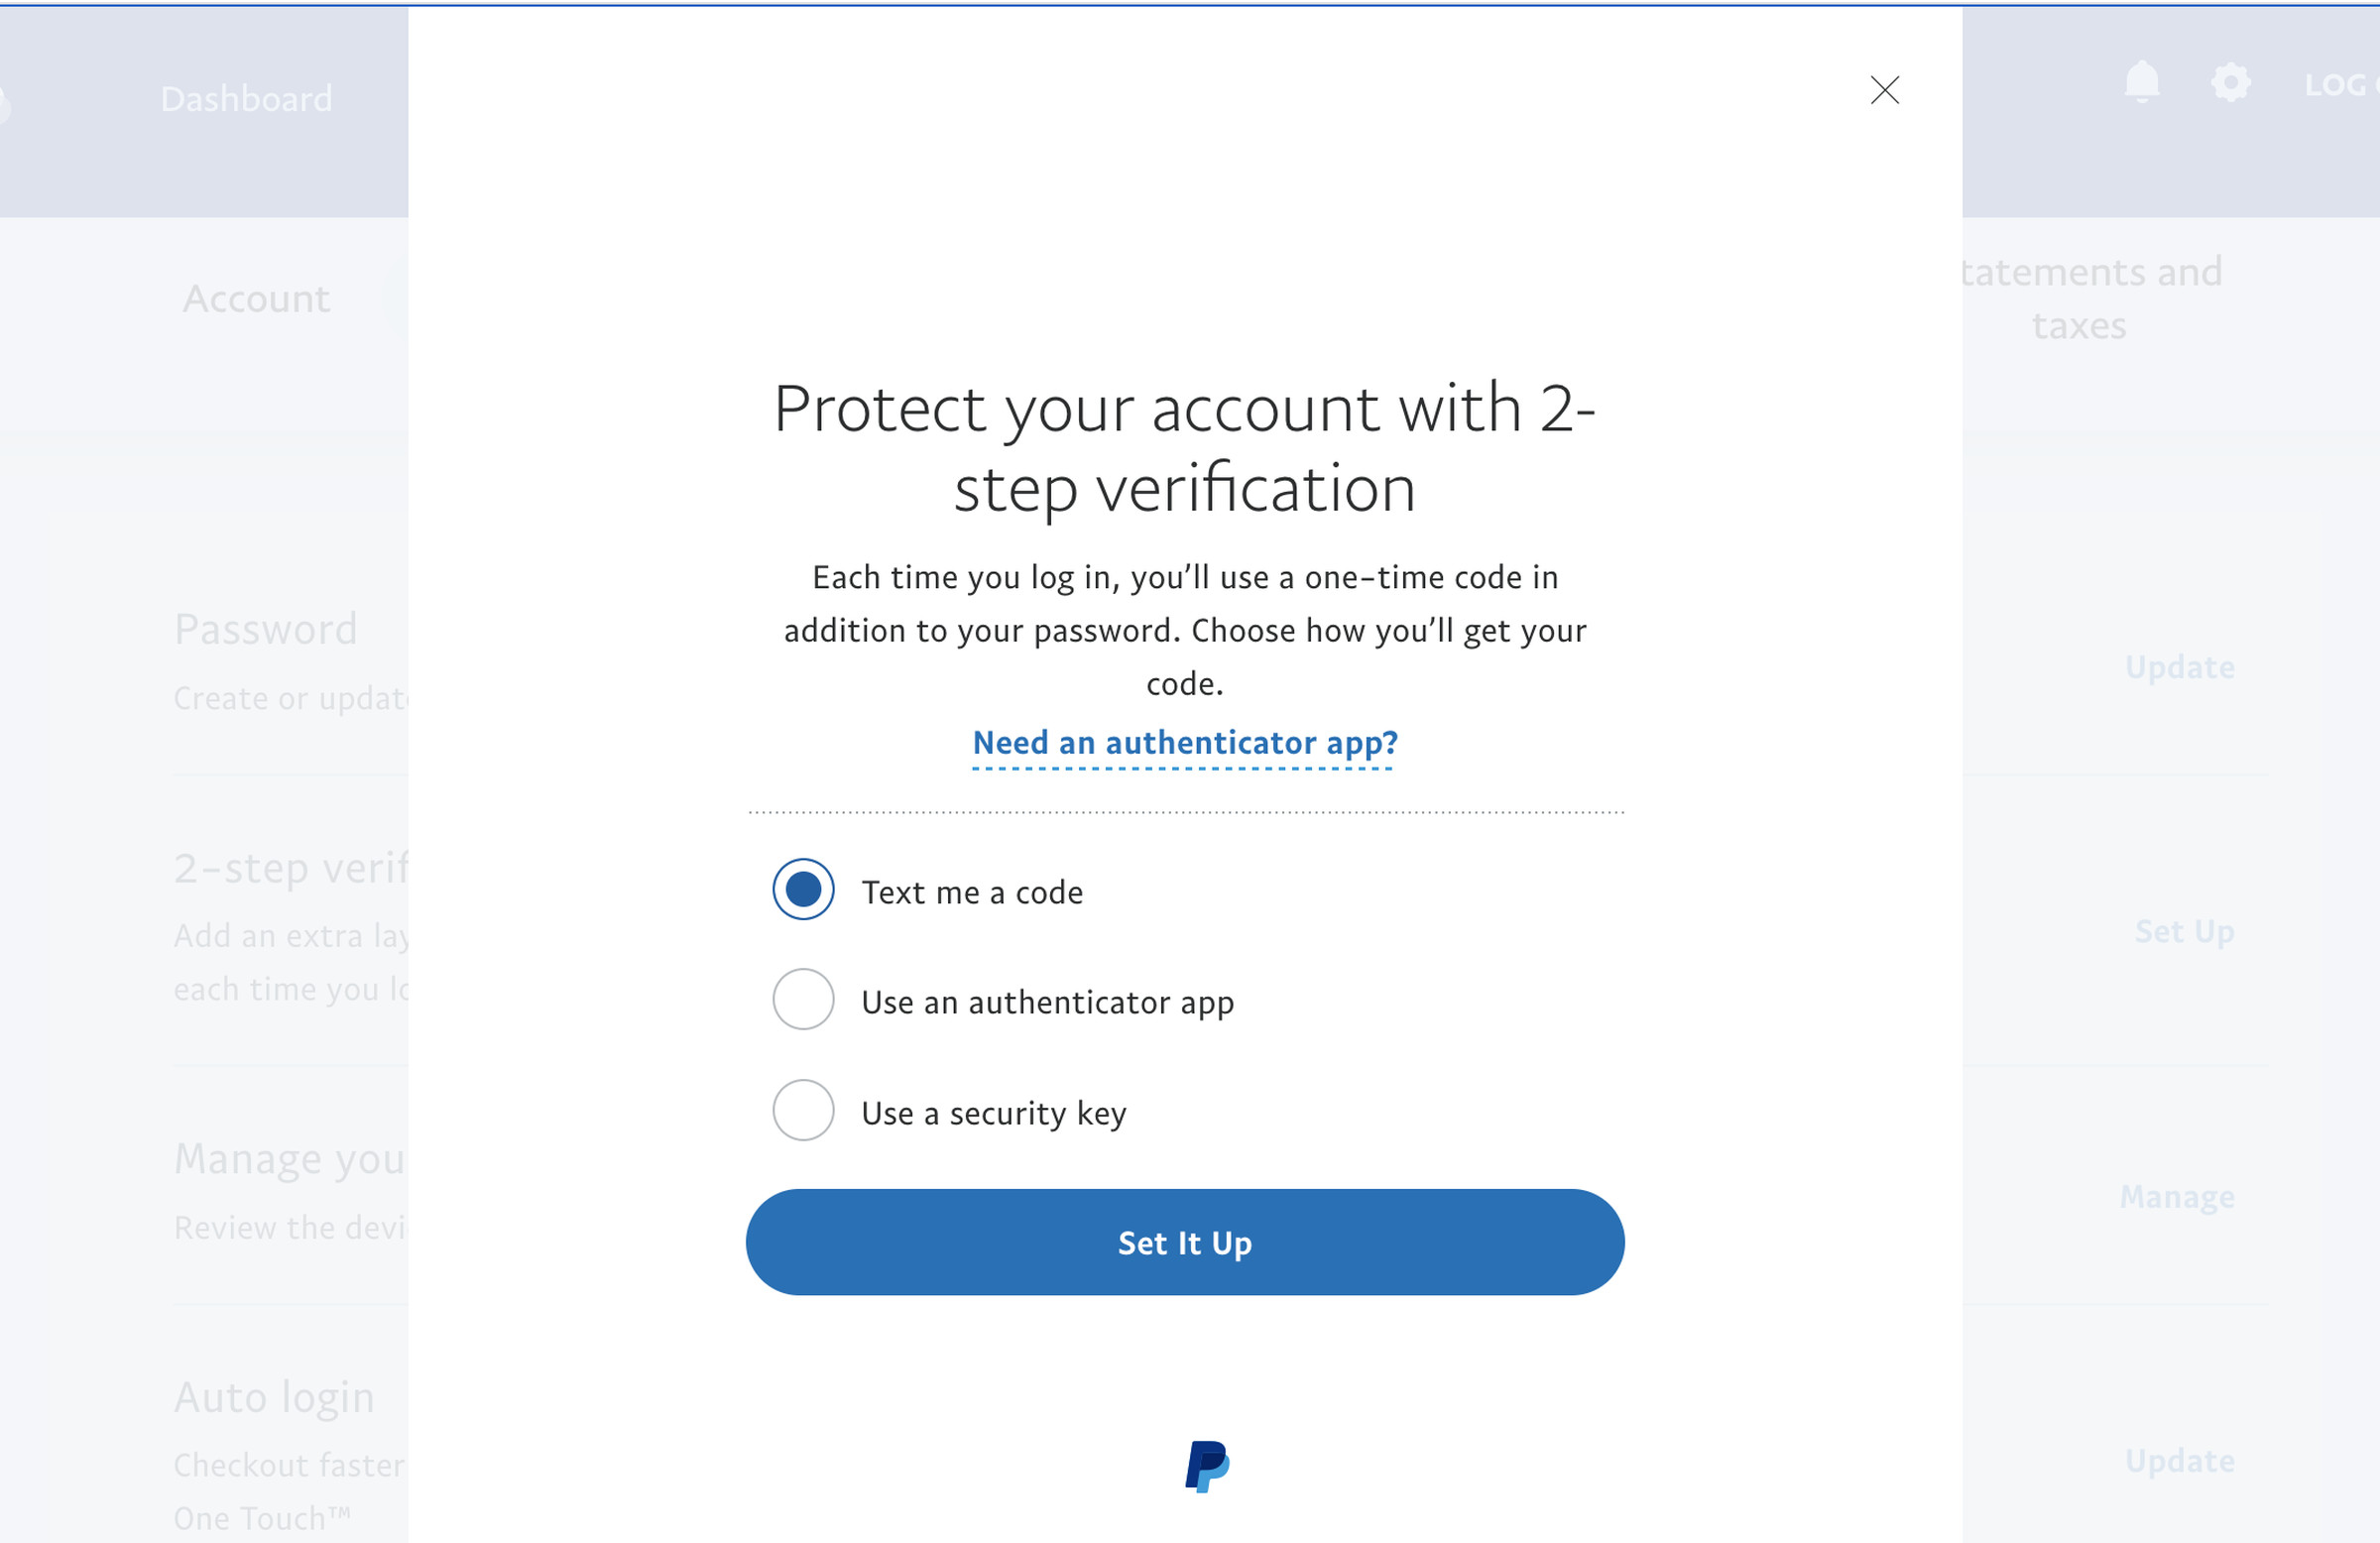 tech news Page headed “Protect your account with 2-step verification” and then checkboxes for a code texted to you, an authenticator app, or a security key.